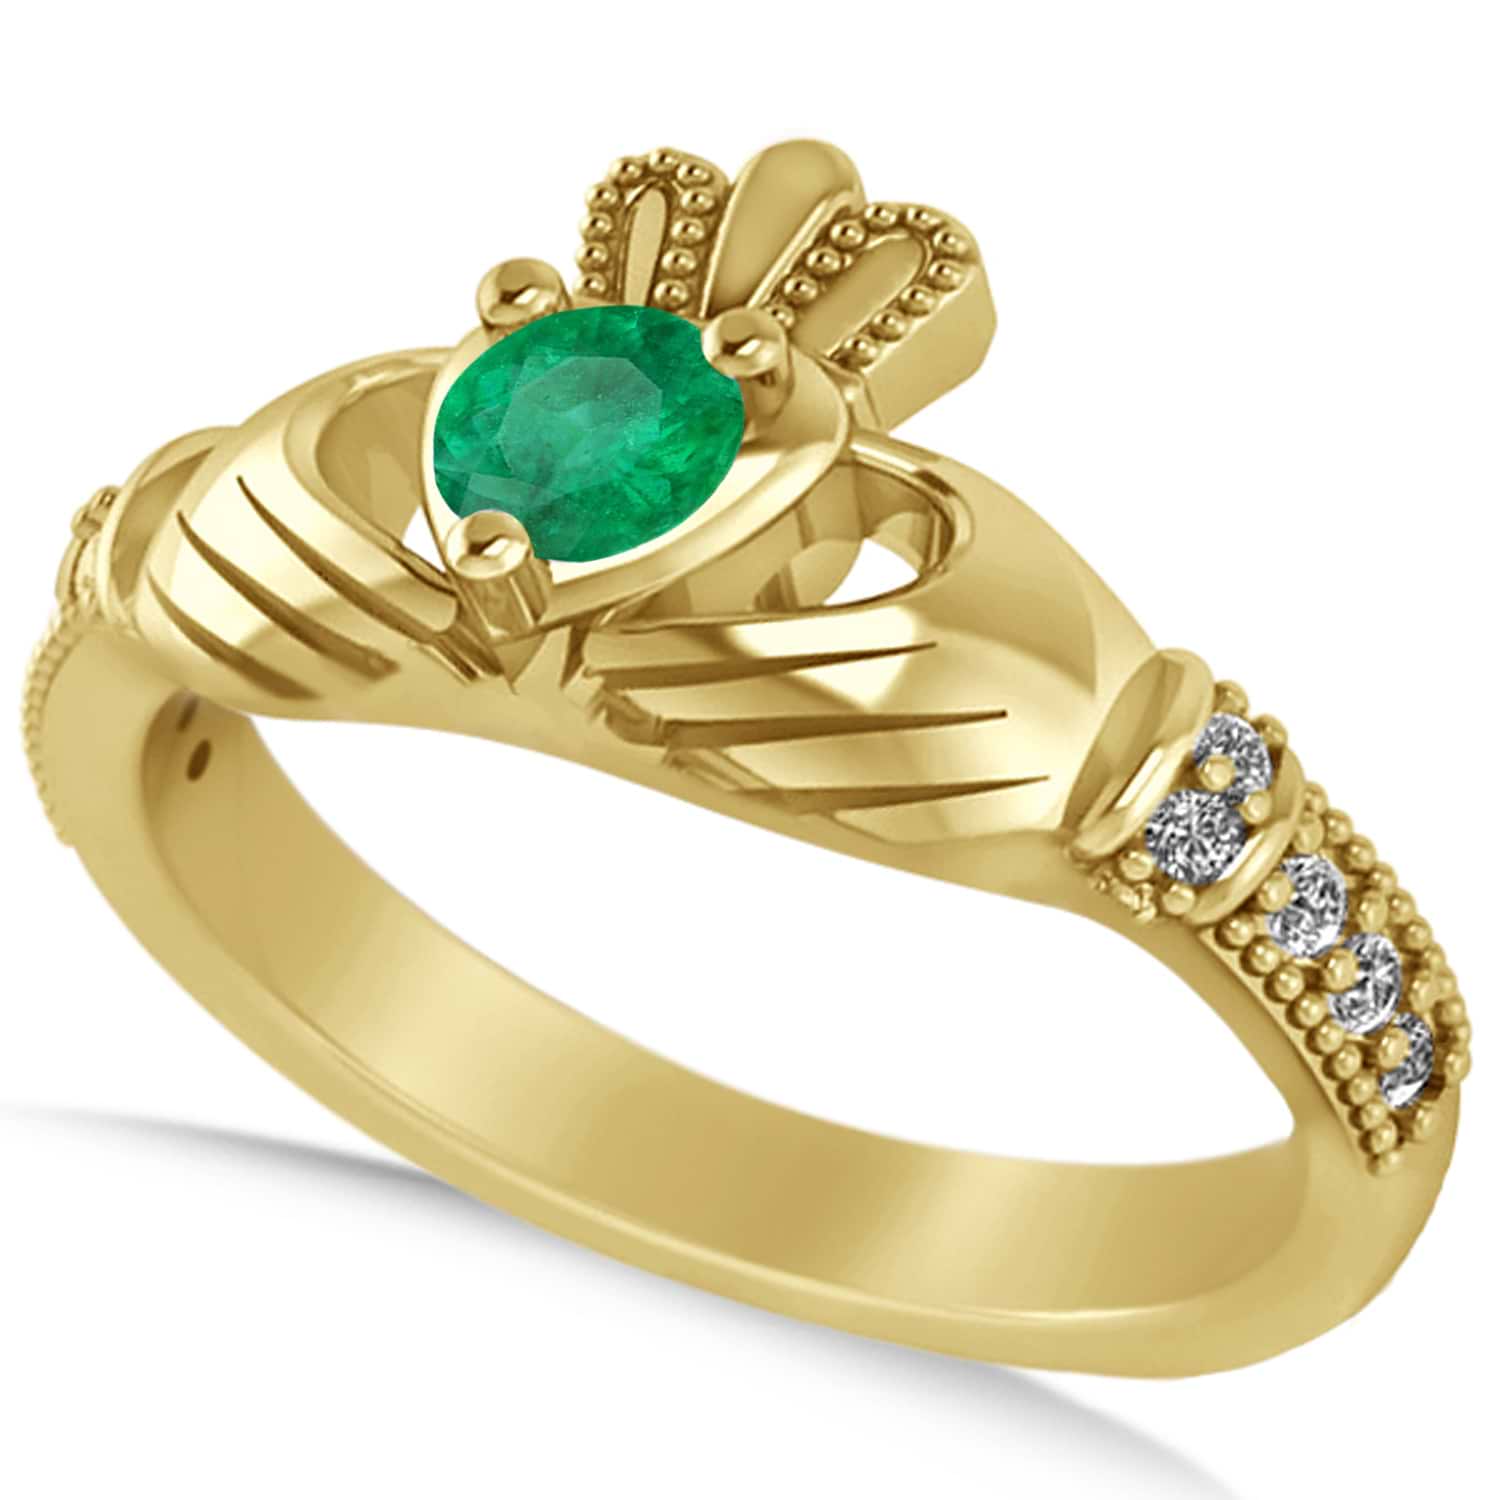 Emerald & Diamond Claddagh Engagement Ring in 14k Yellow Gold (0.42ct)